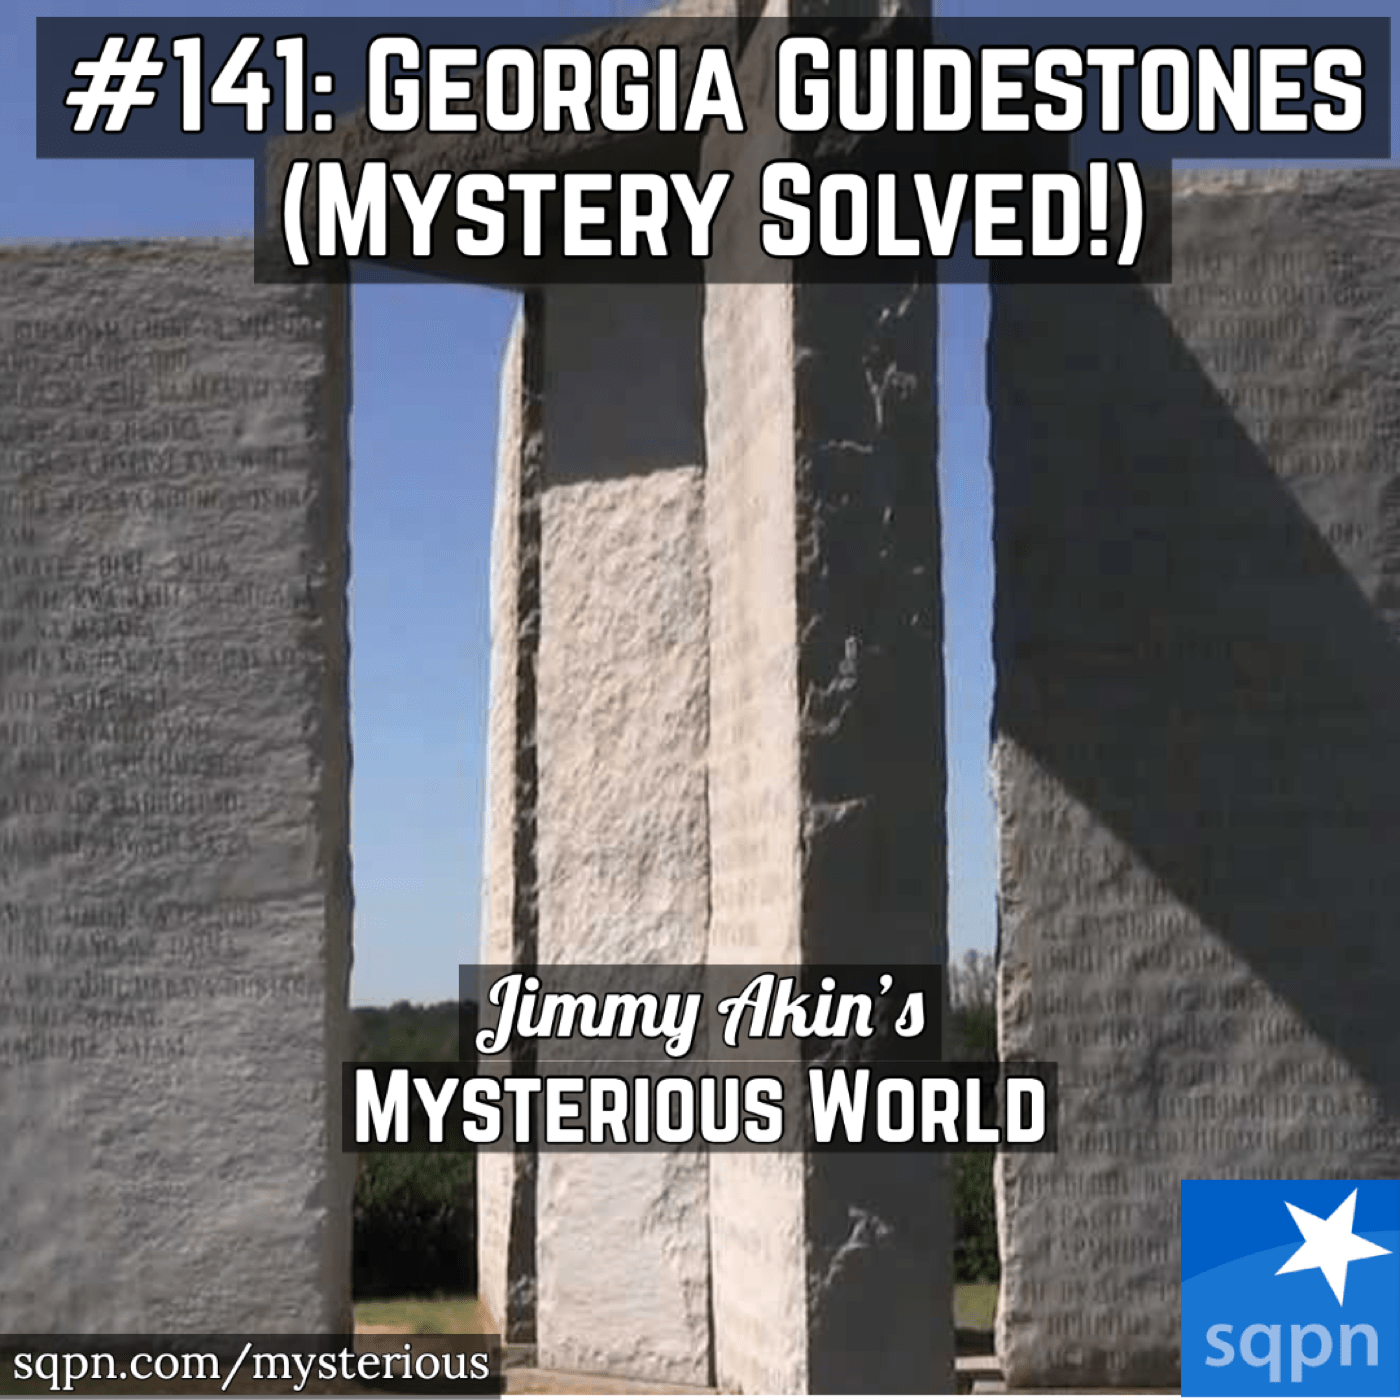 The Georgia Guidestones (Mystery Solved!)